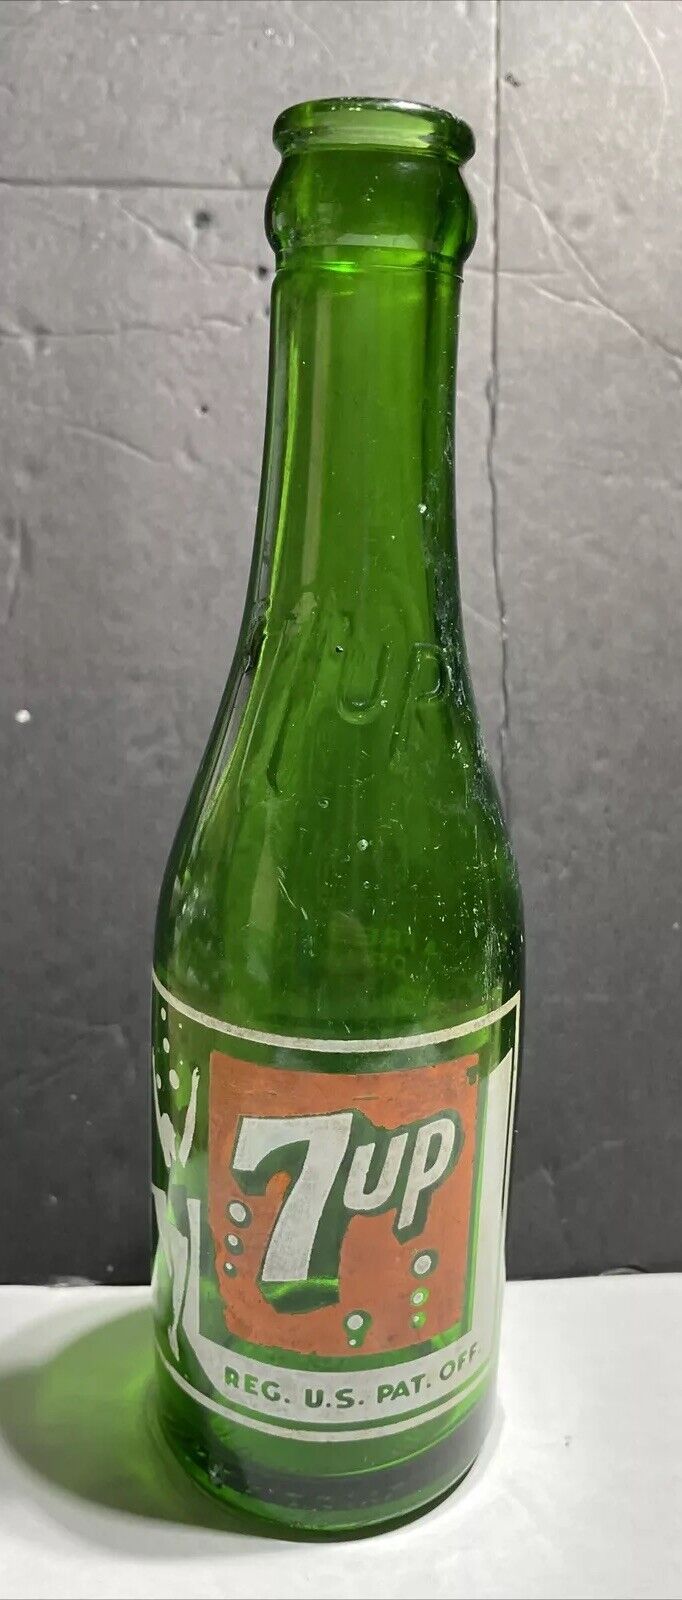 7up Acl Soda Bottle 8 Bubble embossed neck. St Louis, Mo. Missouri